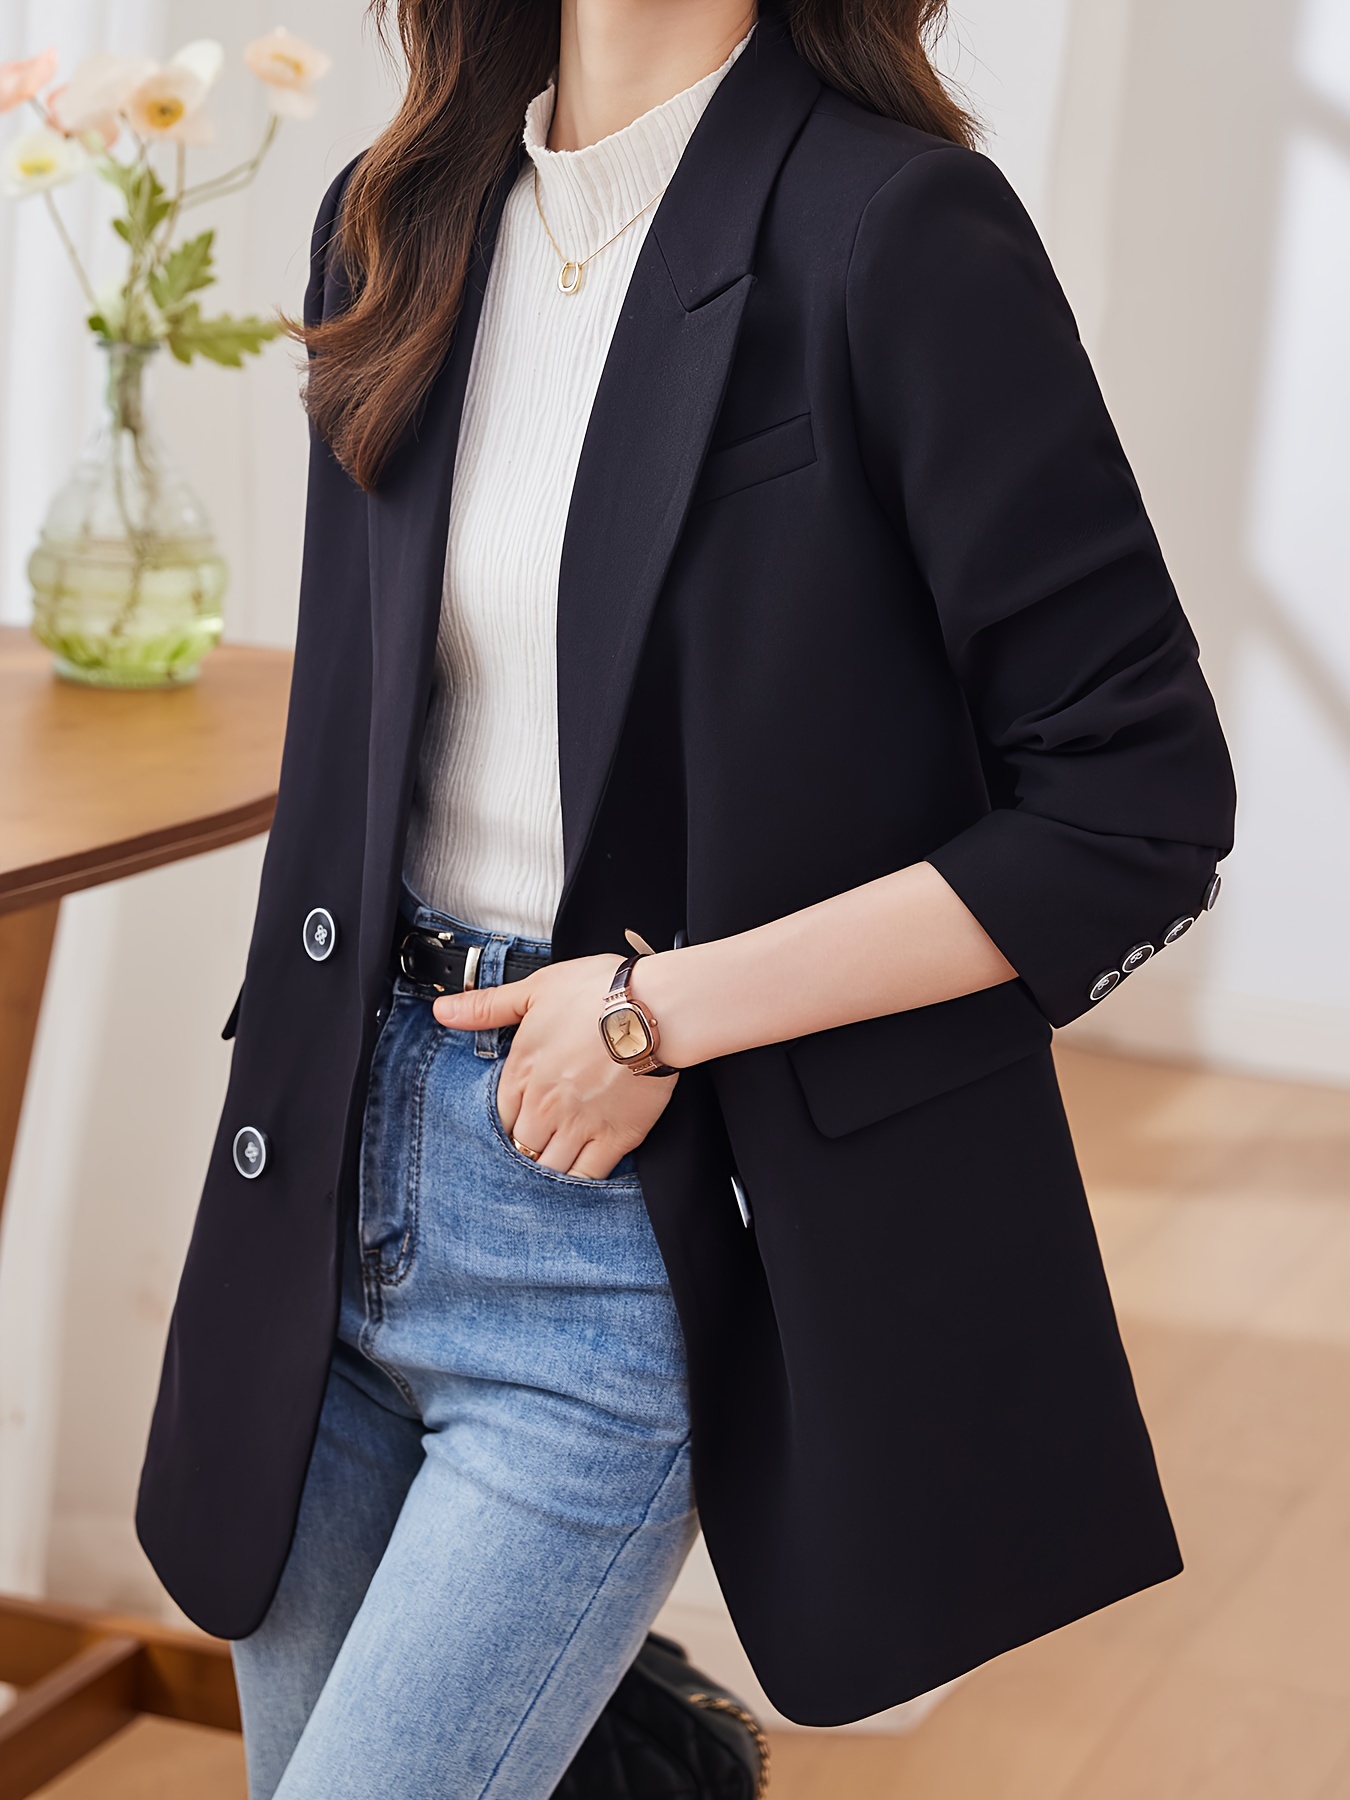 Notched Collar Double-breasted Blazer, Elegant Long Sleeve Blazer For Office & Work, Women s Clothing details 8